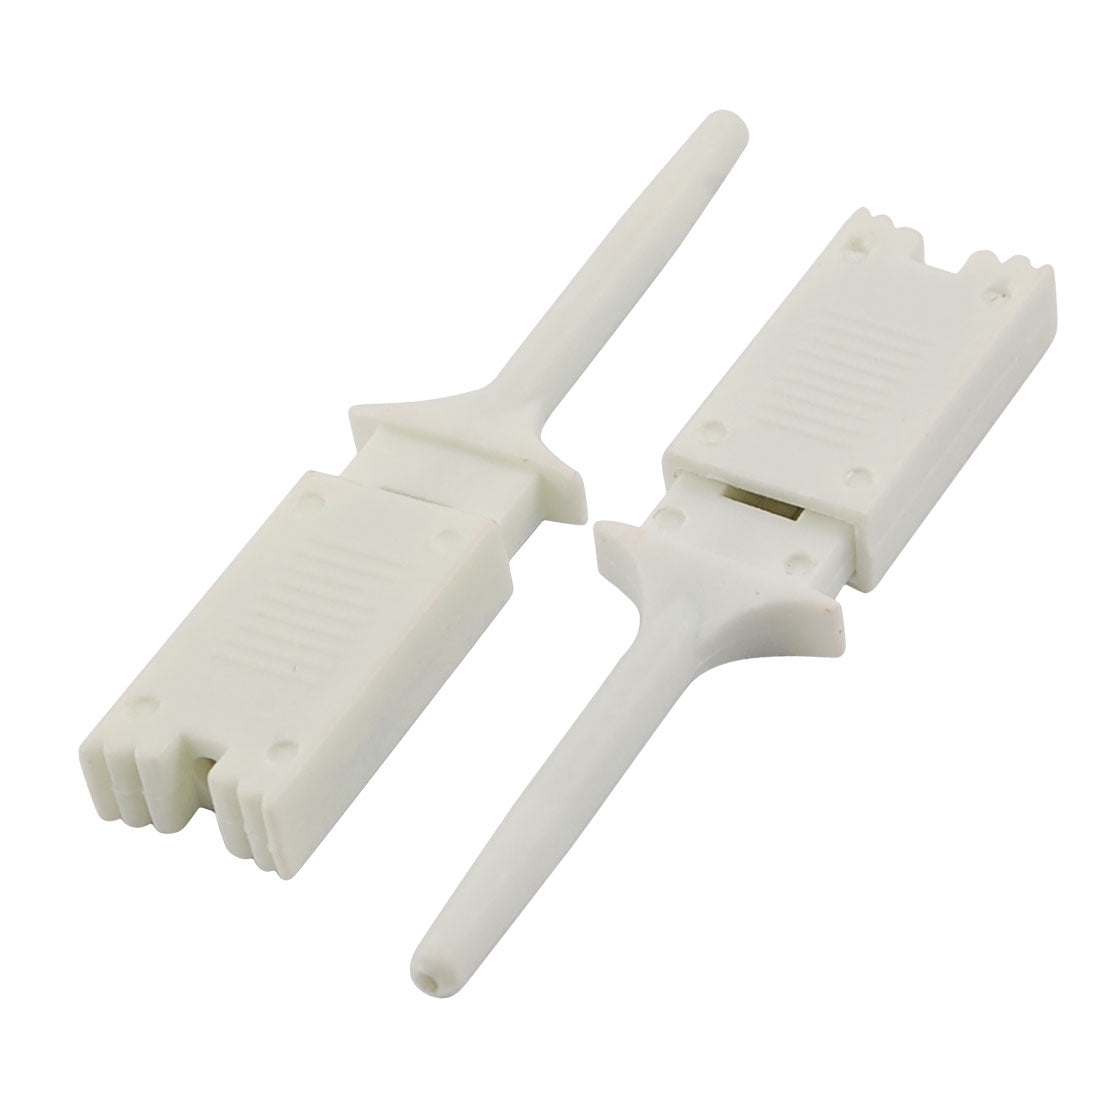 uxcell Uxcell 10 x Plastic Multimeter Test Hook Clip Grabber White 1.9" for PCB Surface Mounted Devices IC